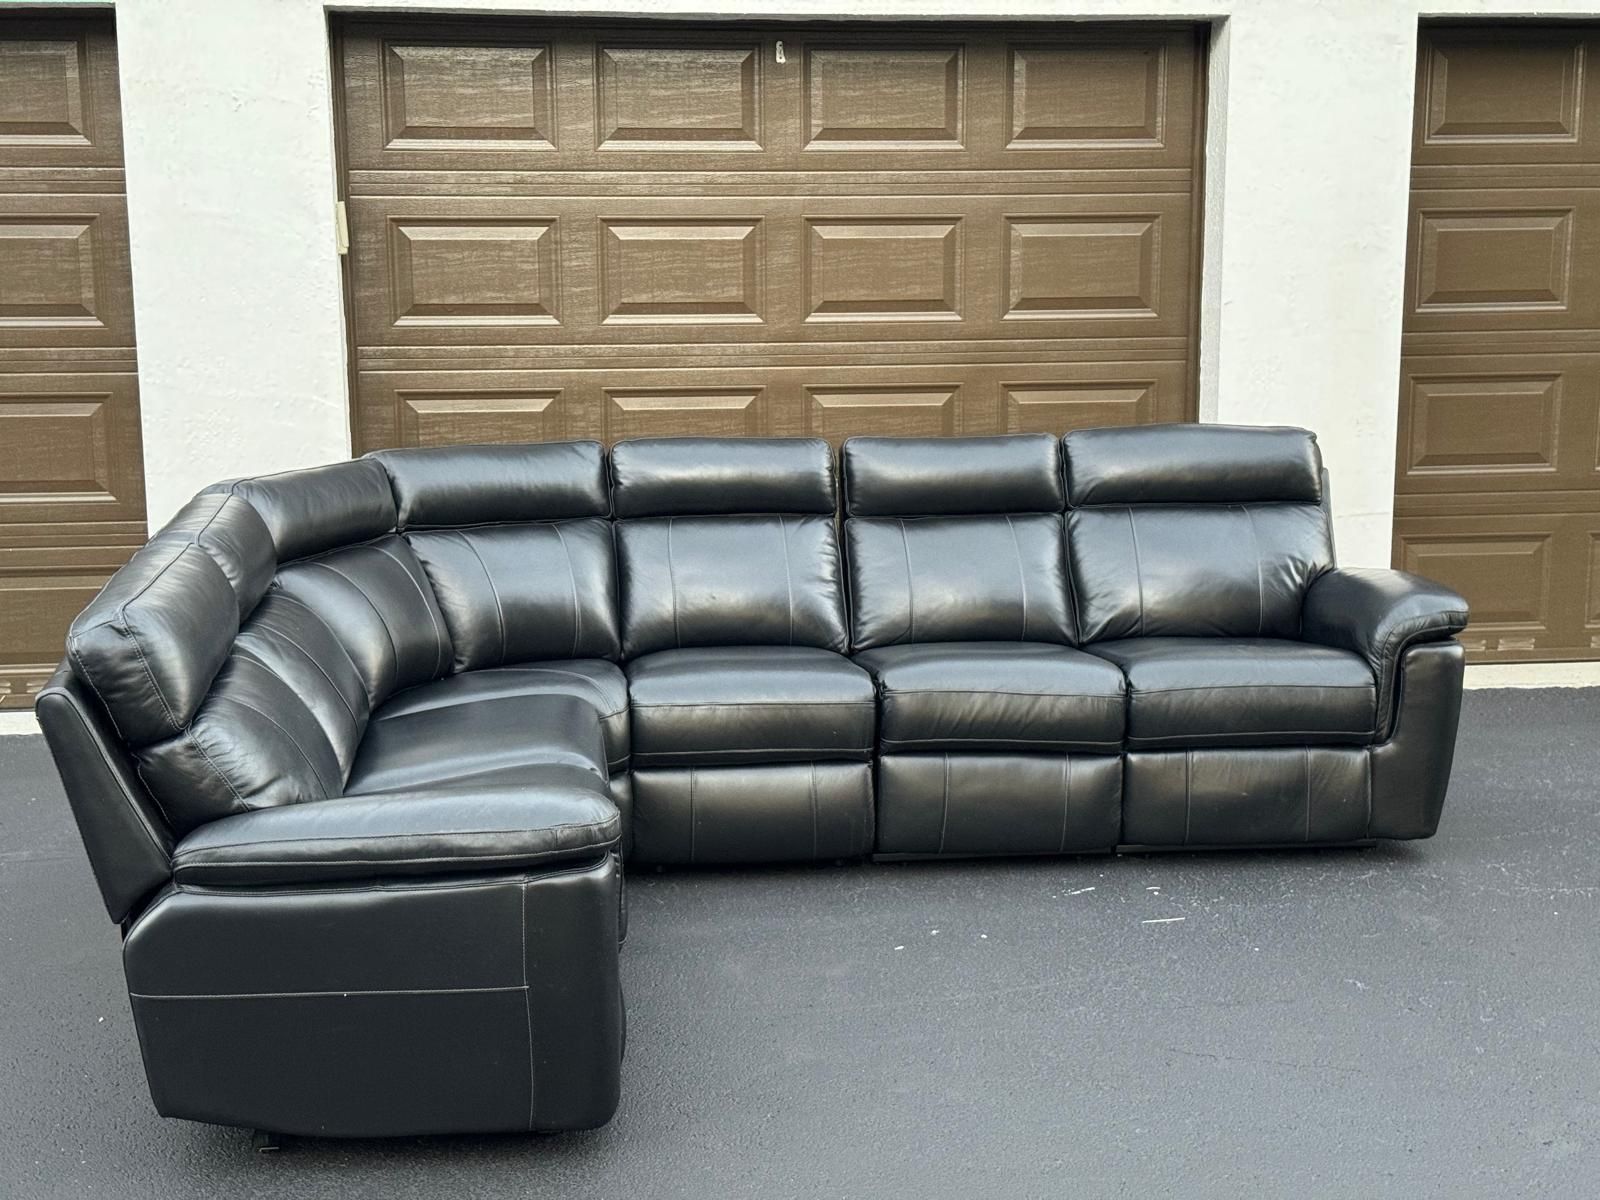 🛋️ Sofa/Couch Sectional - Manual Recliner - Leather - Black - Delivery Available 🚛